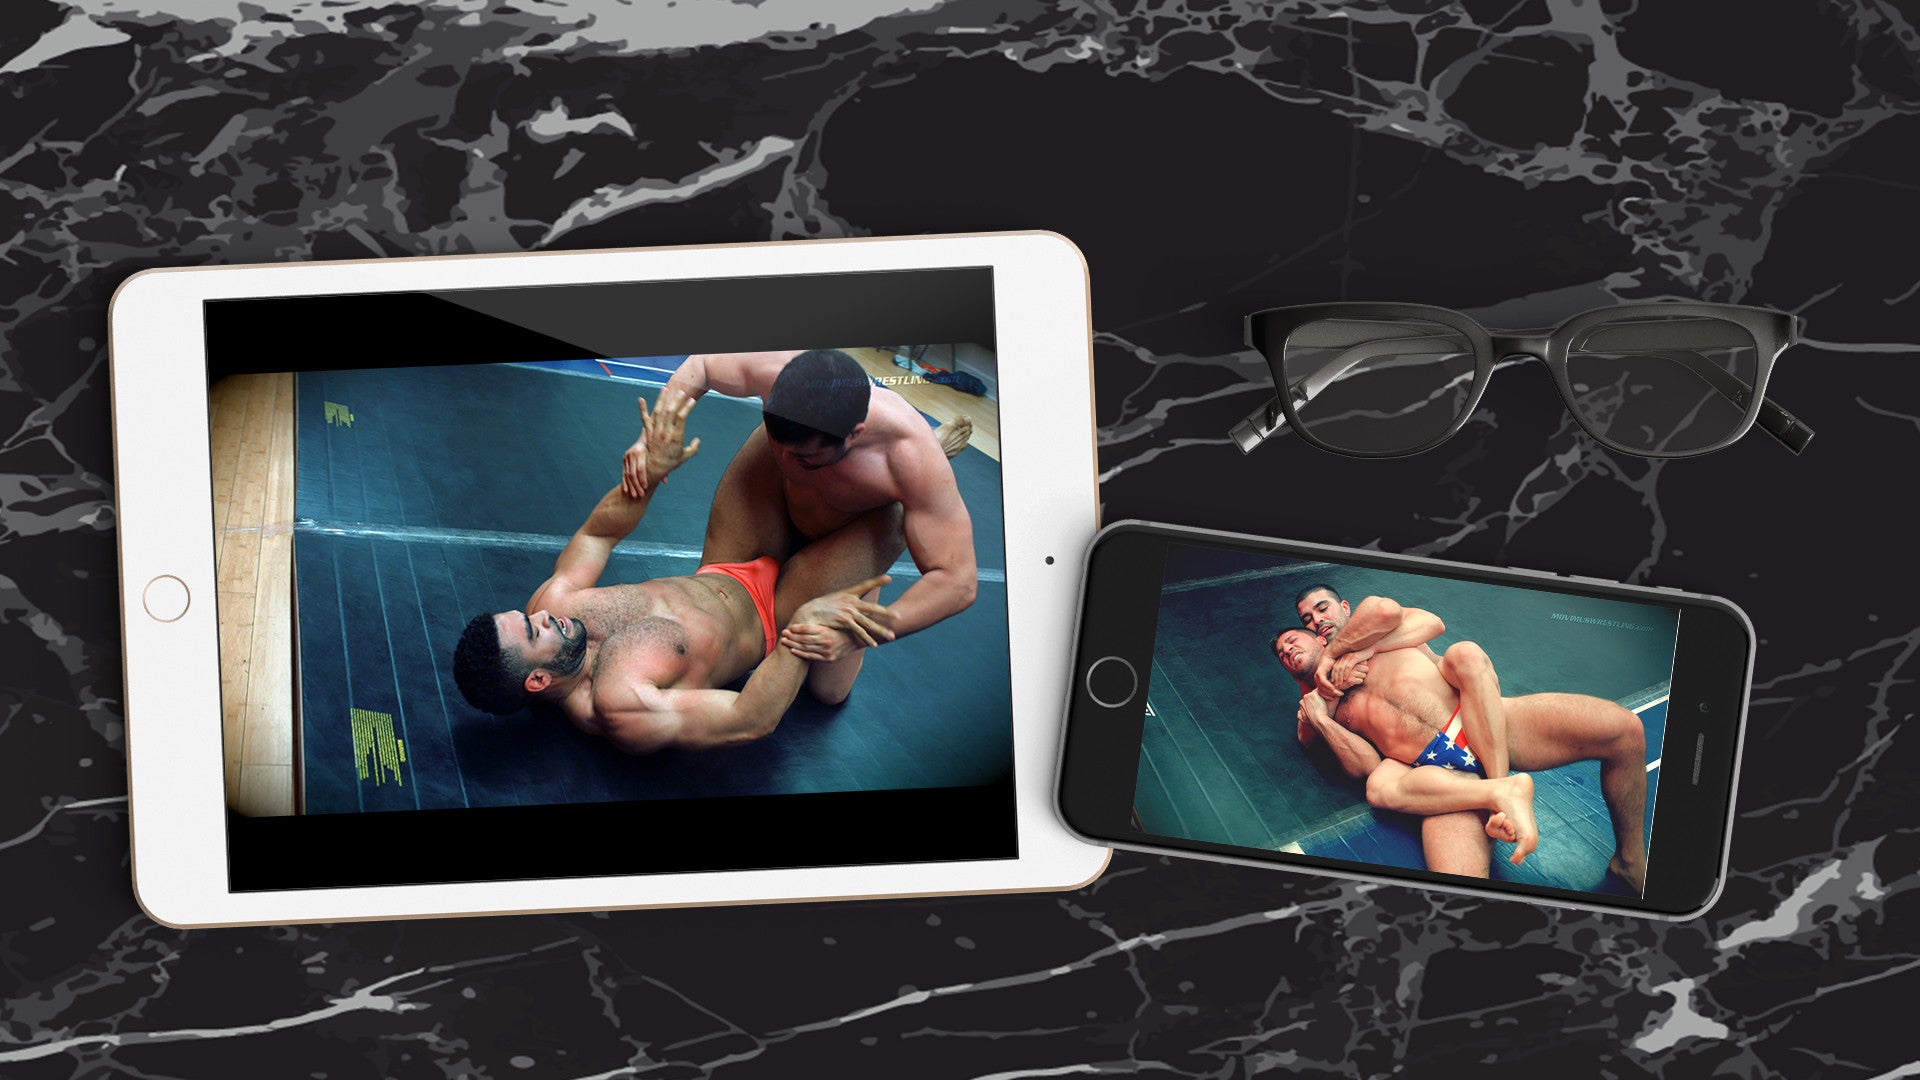 Downloading Movimus Wrestling Matches to your iOS devices- i.e. iPad, iPhones etc.